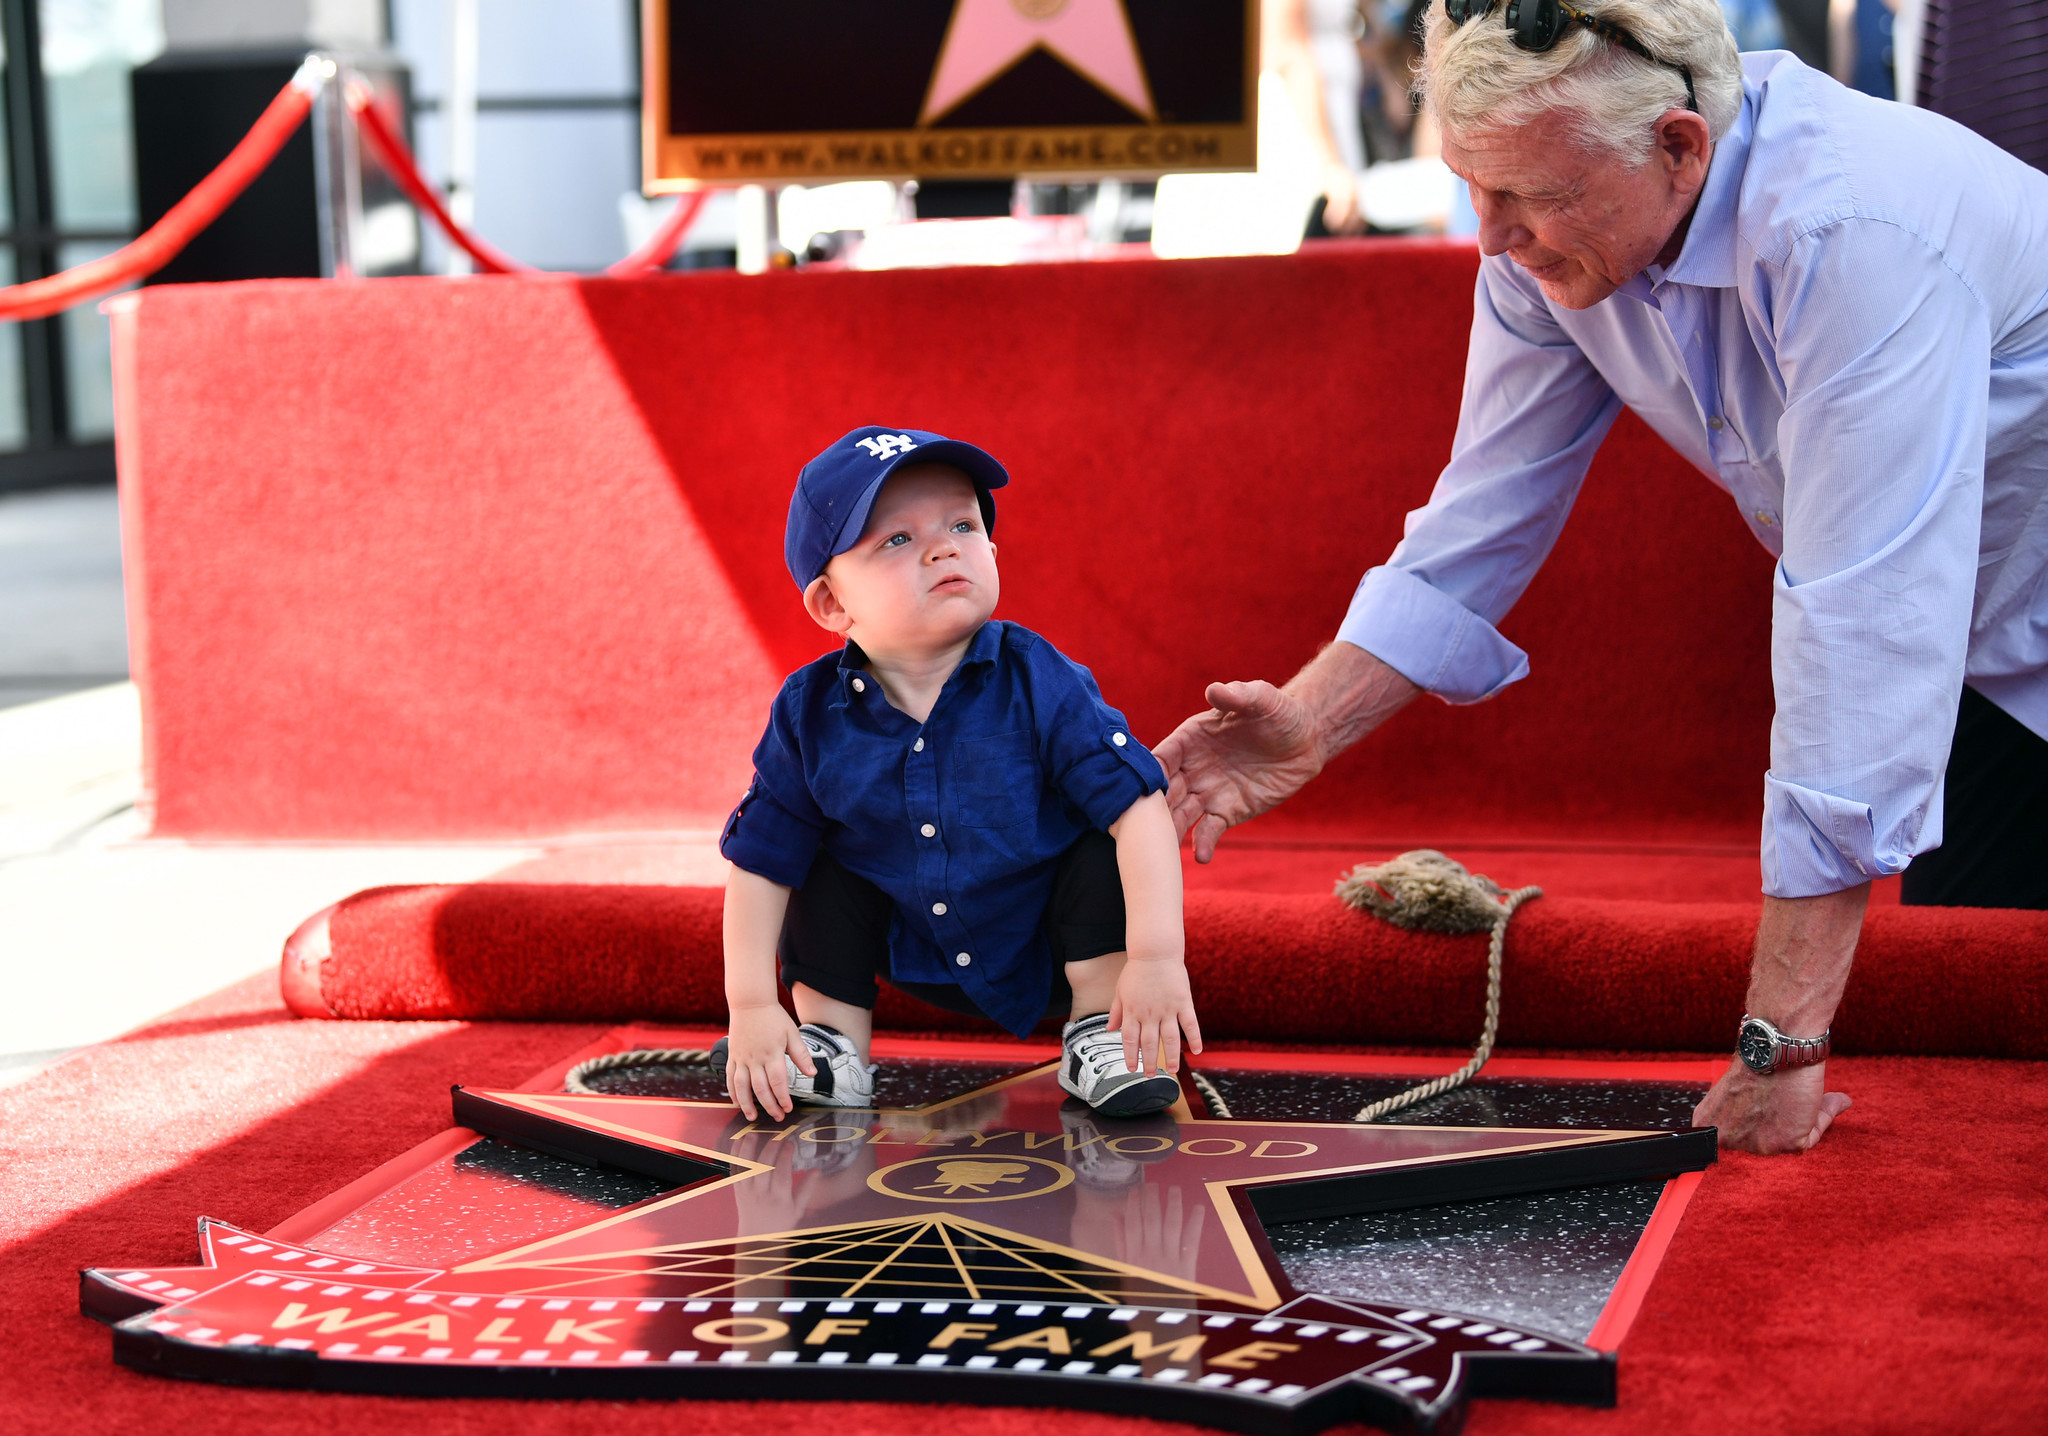 Kirsten Dunst's 15-month-old son Ennis Howard Plemons attends poses next to her new star of the Hollywood Walk of Fame during the star ceremony on Aug. 29, 2019.